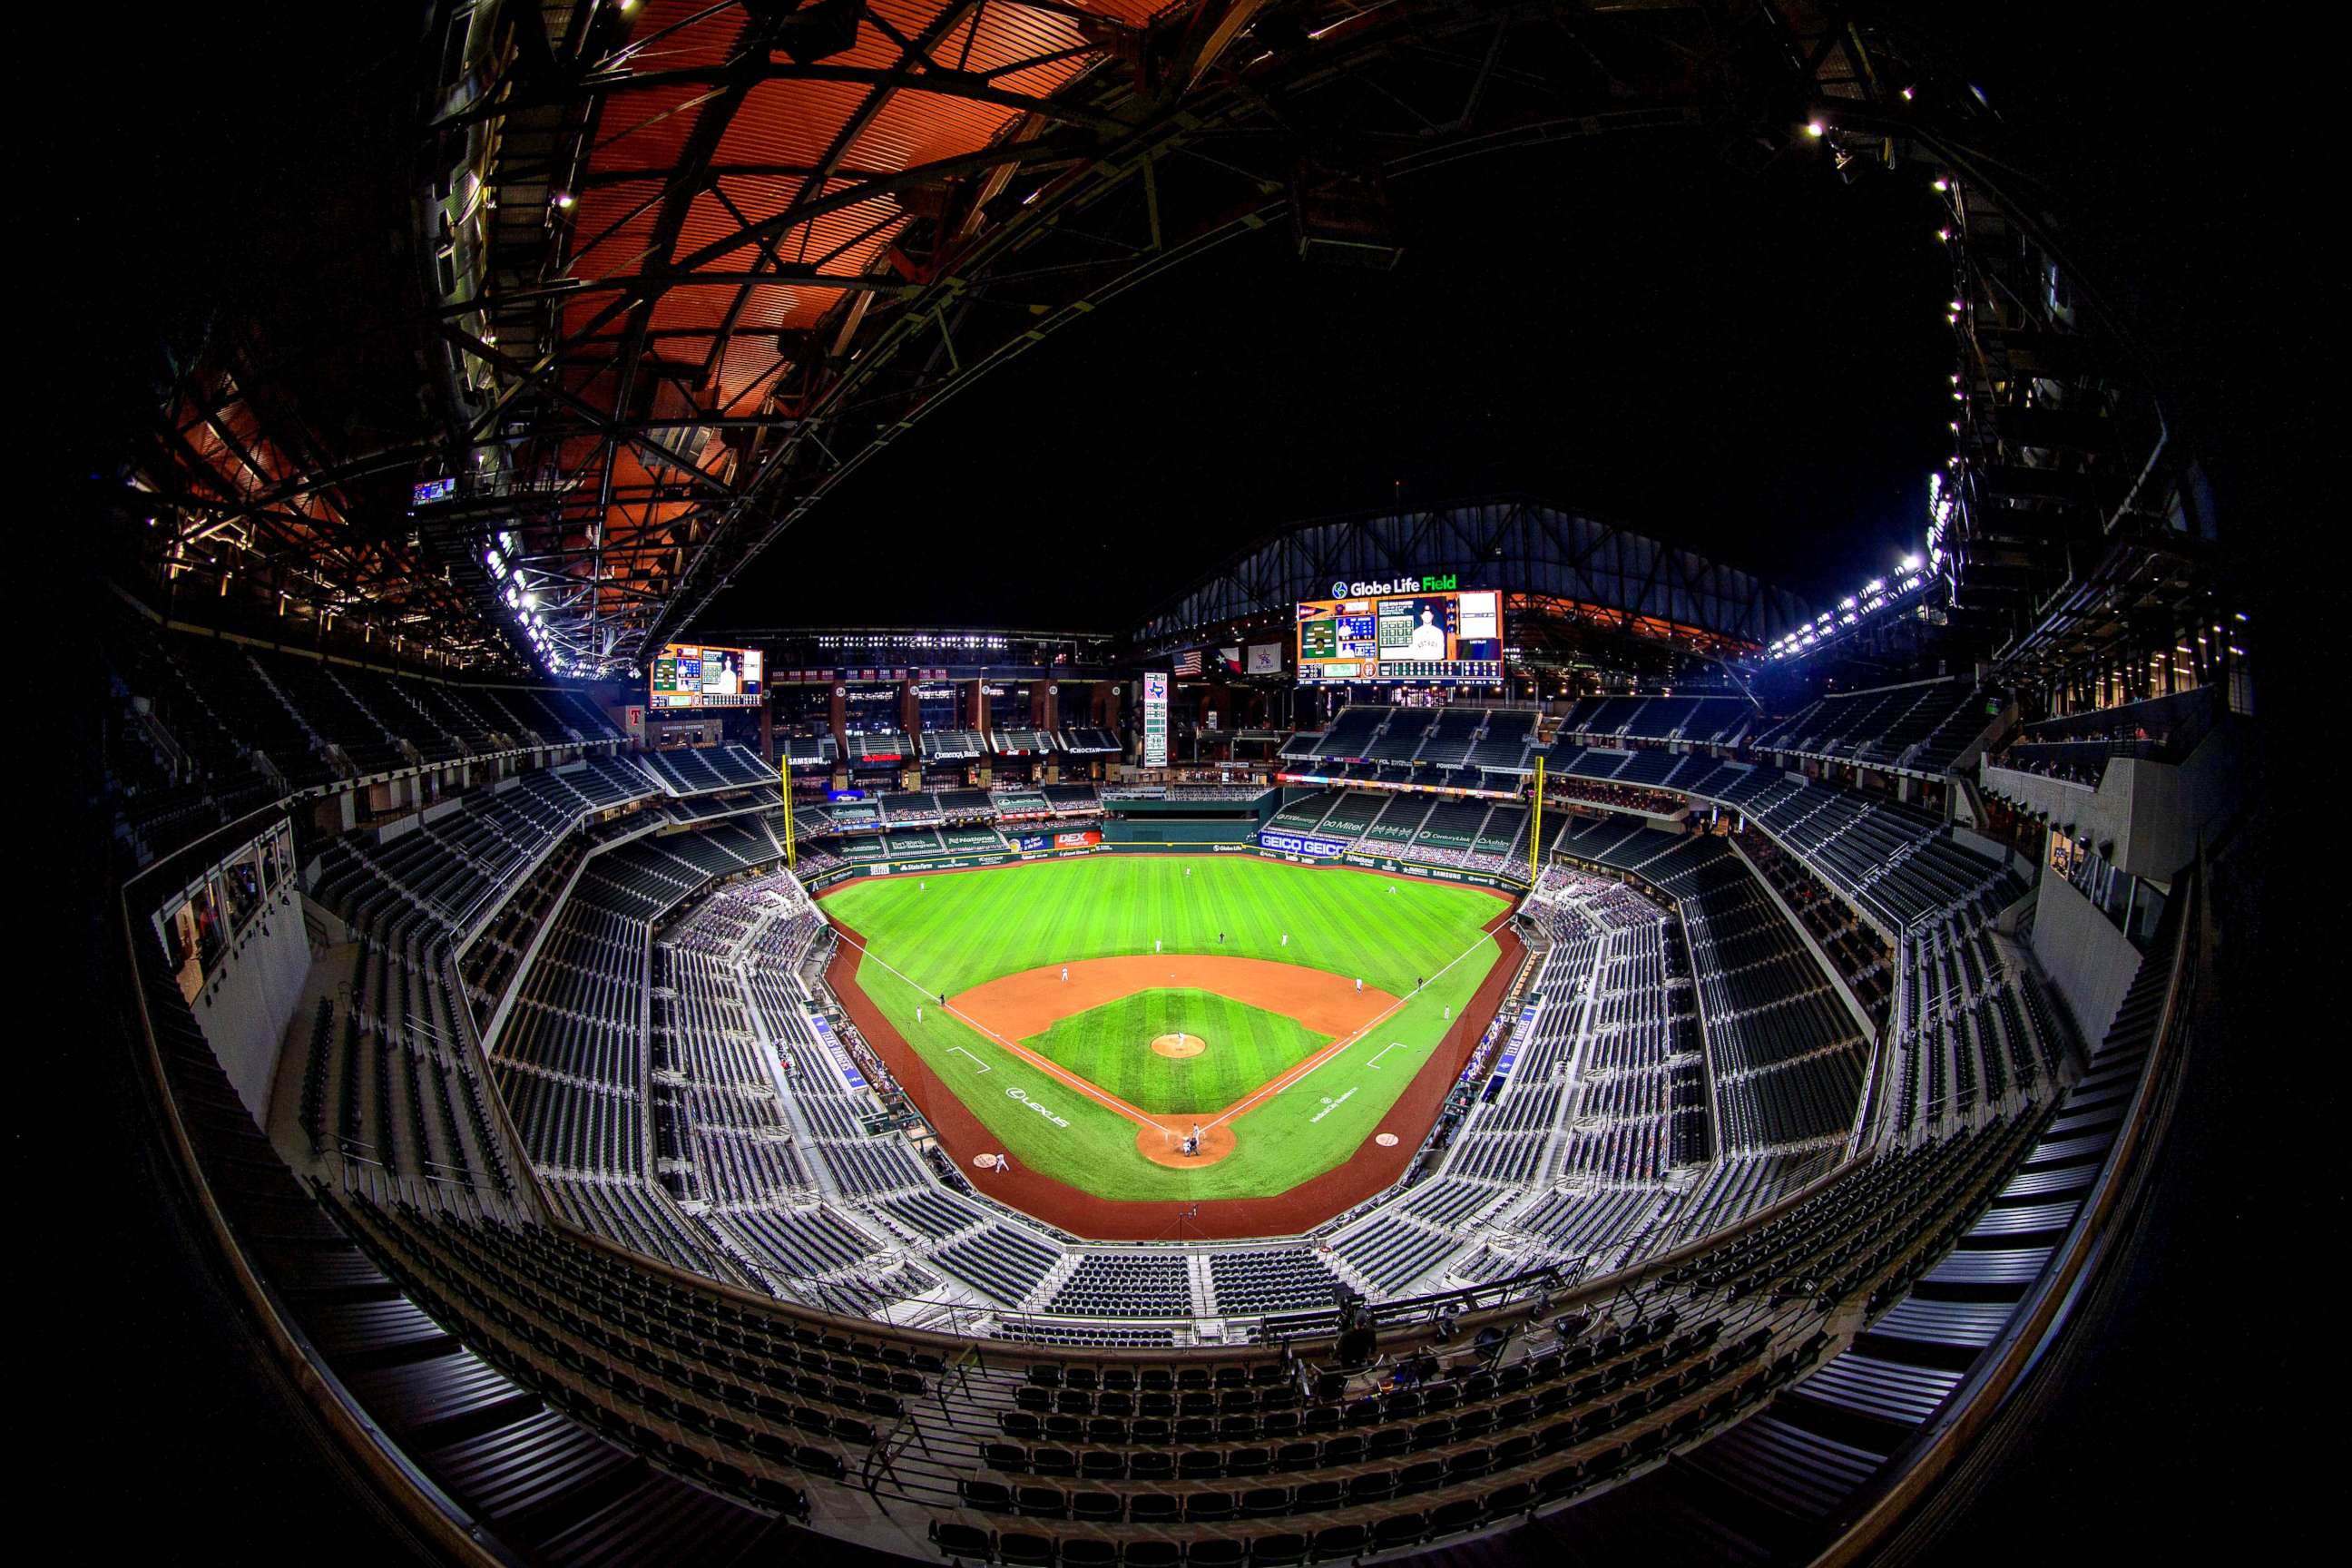 PHOTO: A view of the stands and the open roof during the game between the Texas Rangers and the Houston Astros at Globe Life Field.